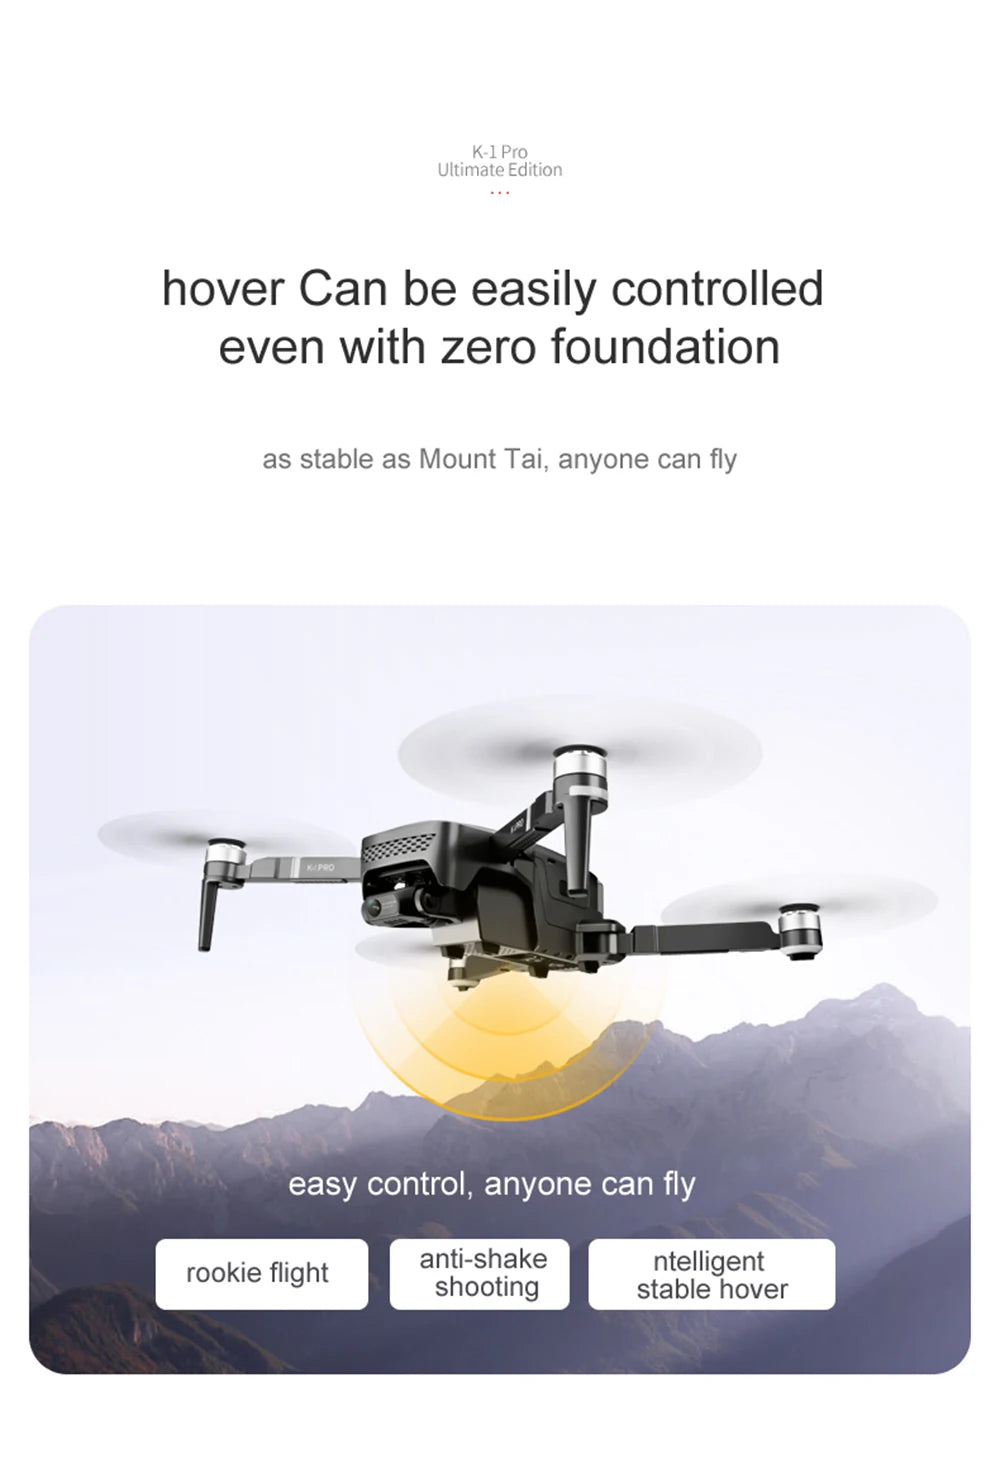 VISUO ZEN K1 PRO Drone, K-l Pro Ultimate Edition hover Can be easily controlled even with zero foundation as stable as Mount